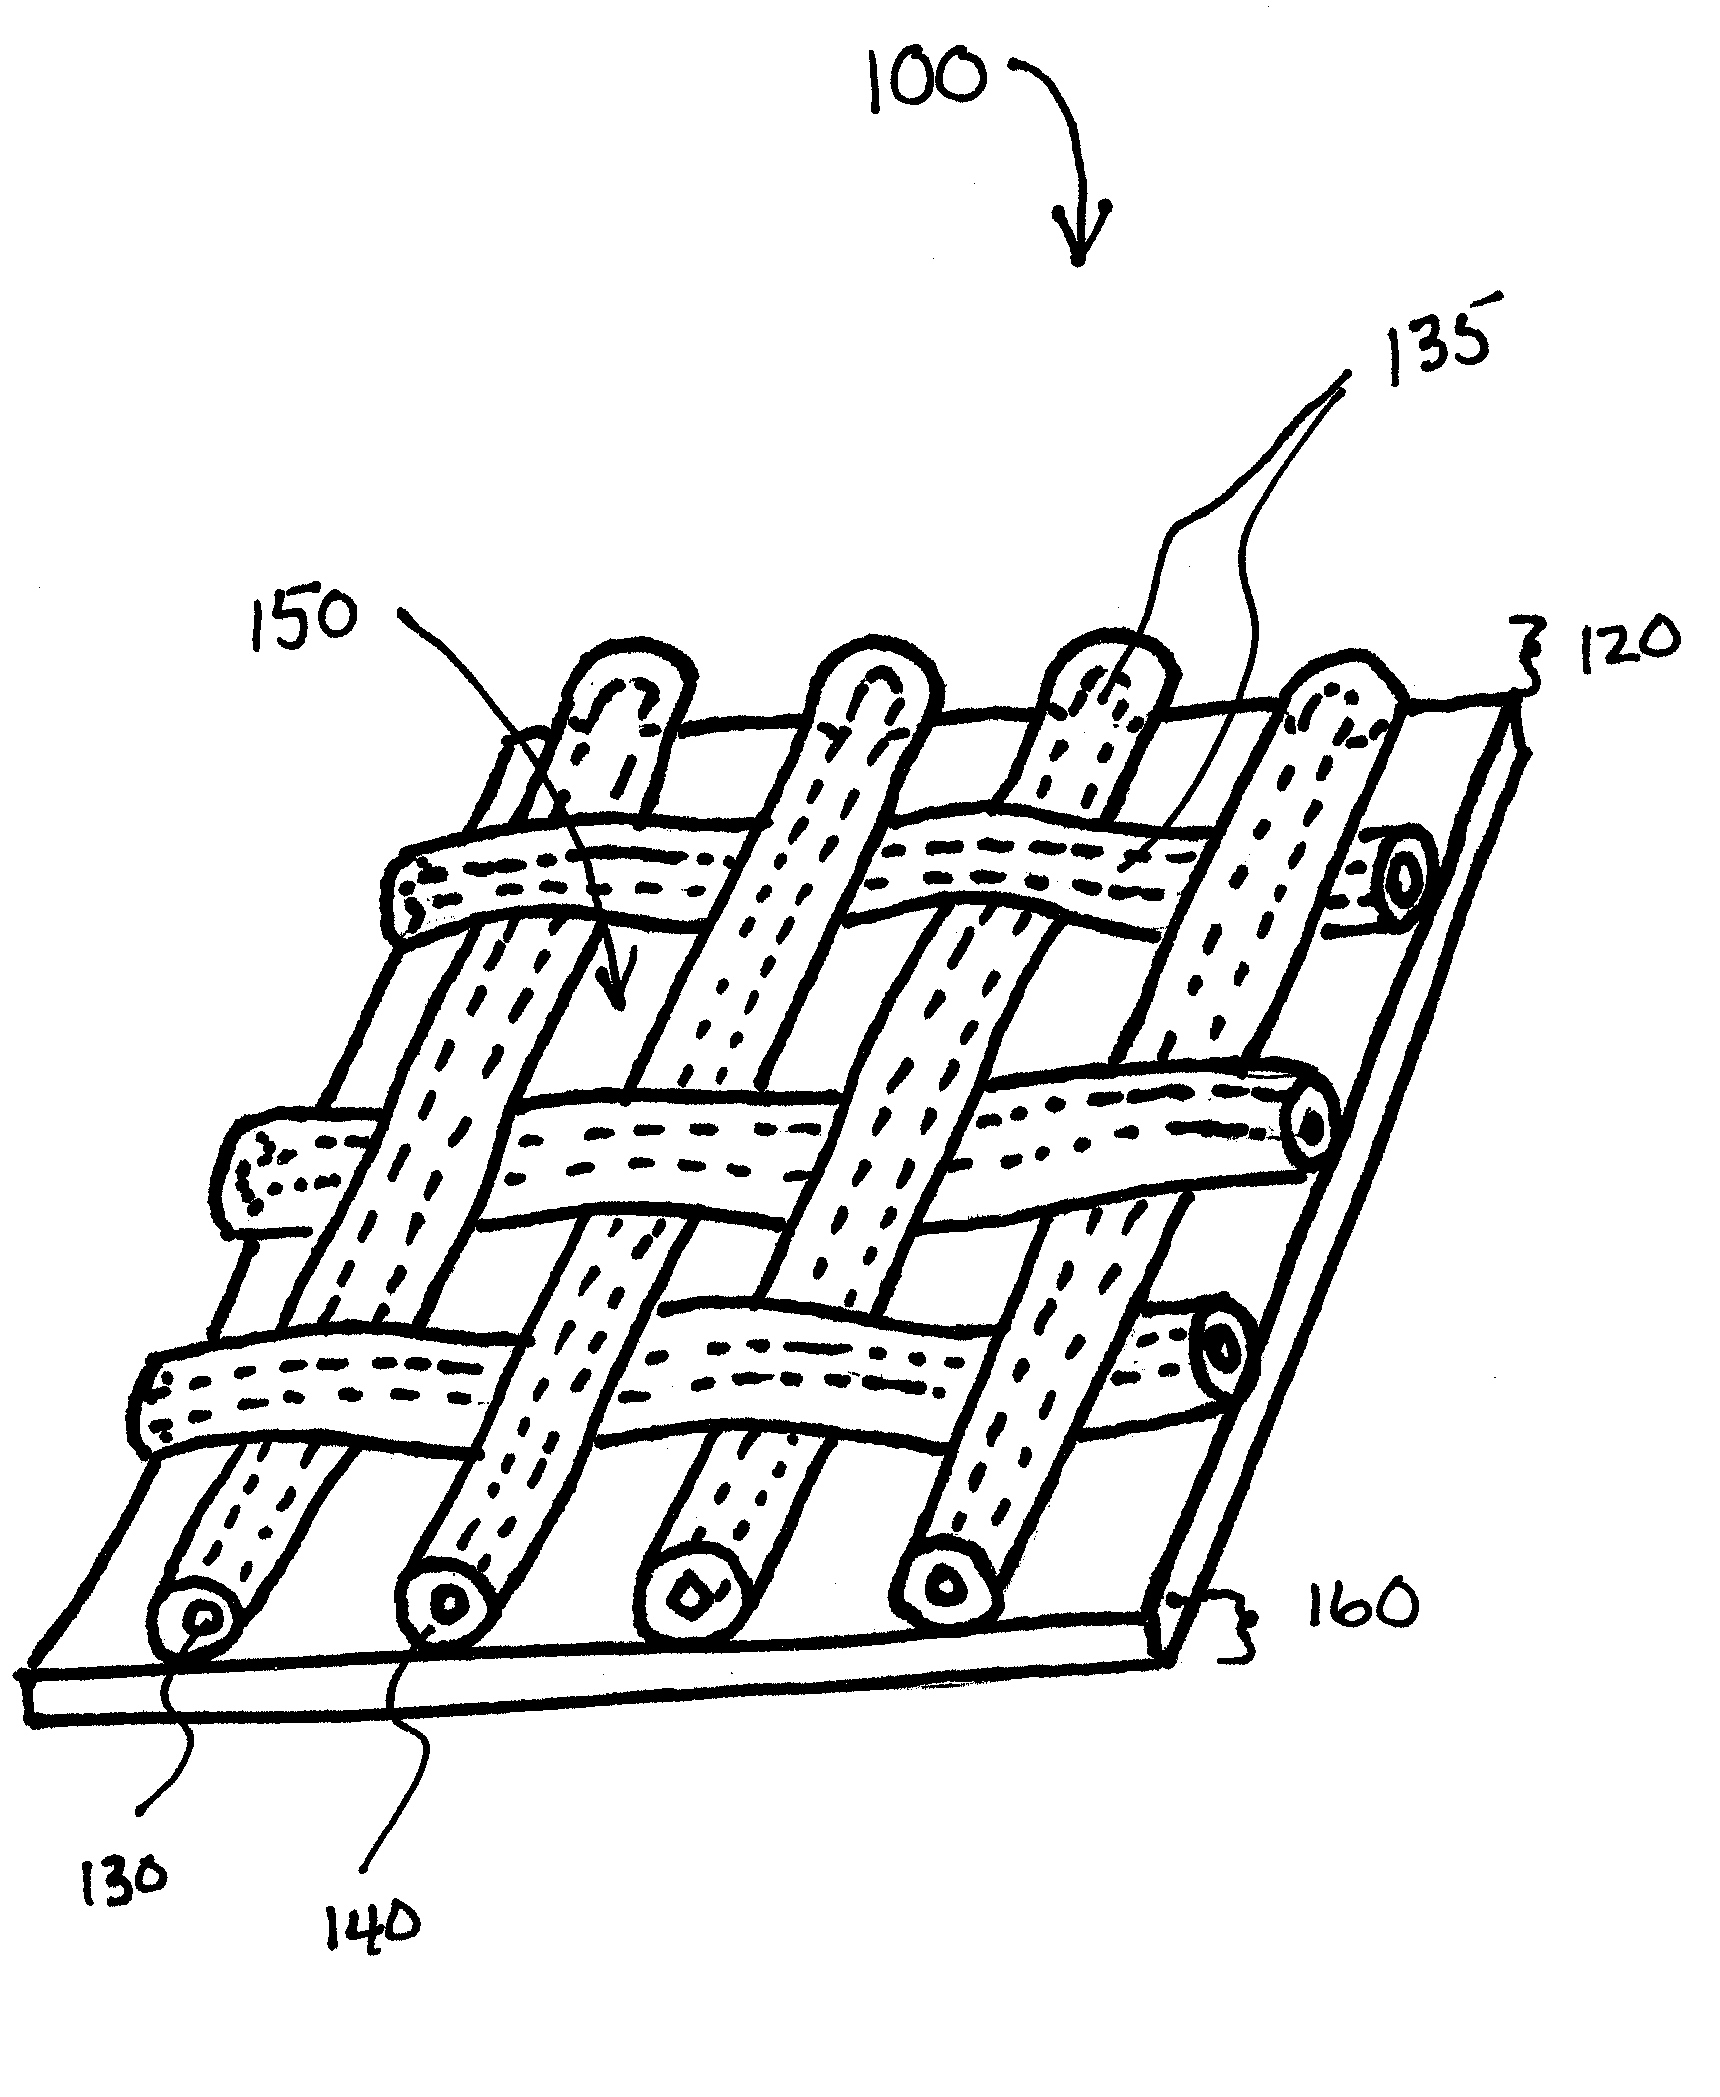 Apparatus and Method for Limiting Surgical Adhesions